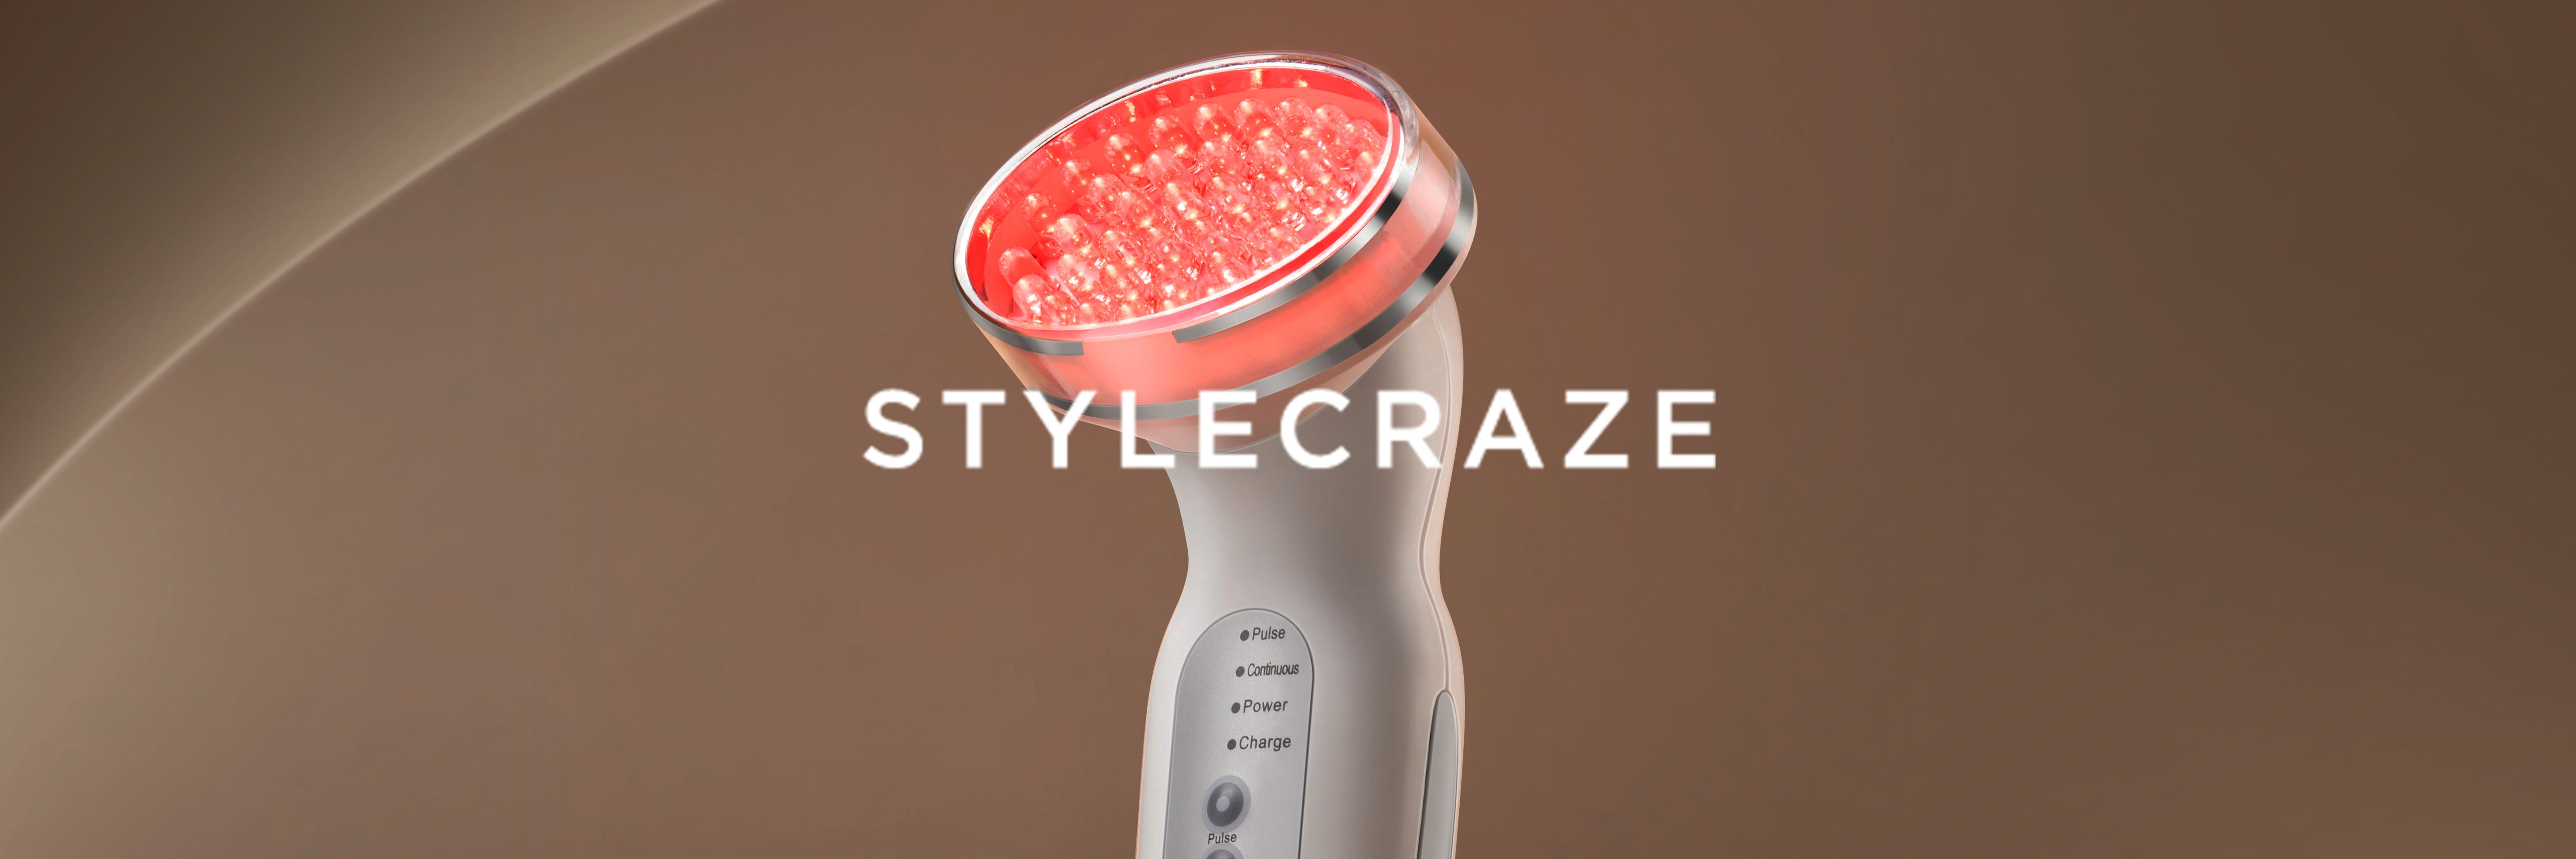 Red LED+ JUST GOT PICKED AS THE BEST ANTI-AGING